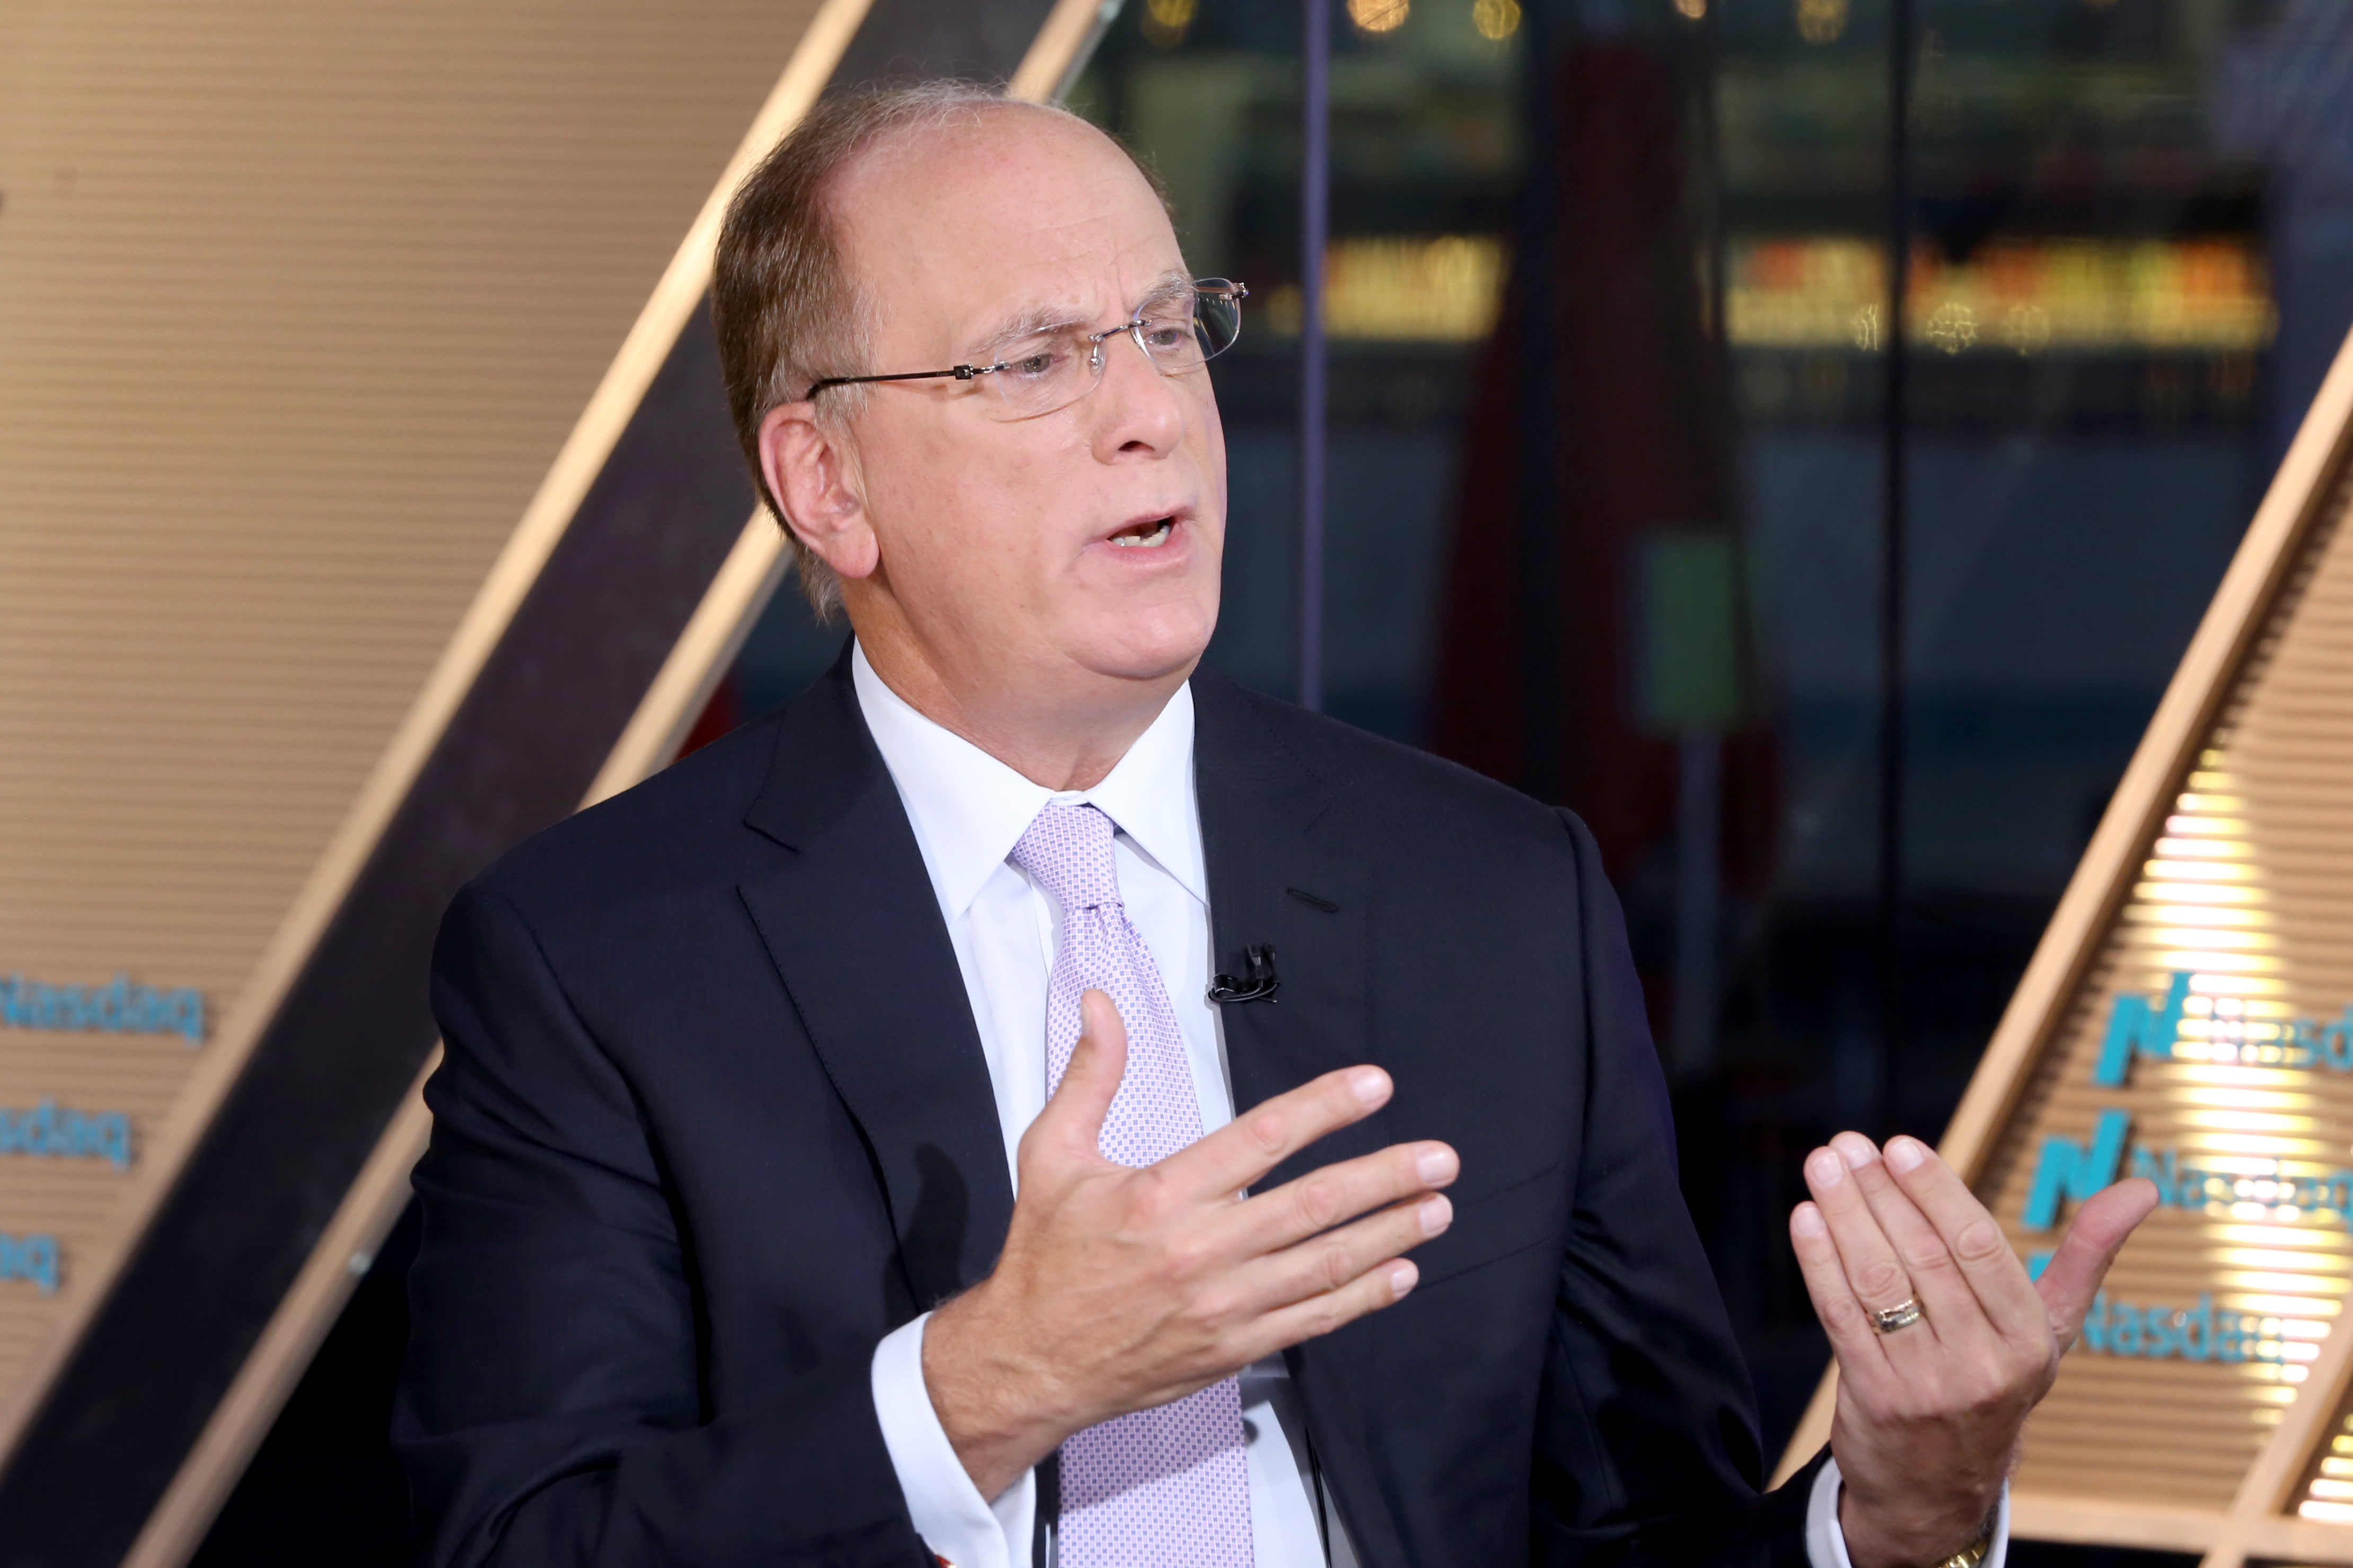 India’s Obsession with Gold Has Failed to Boost its Economy, According to Larry Fink